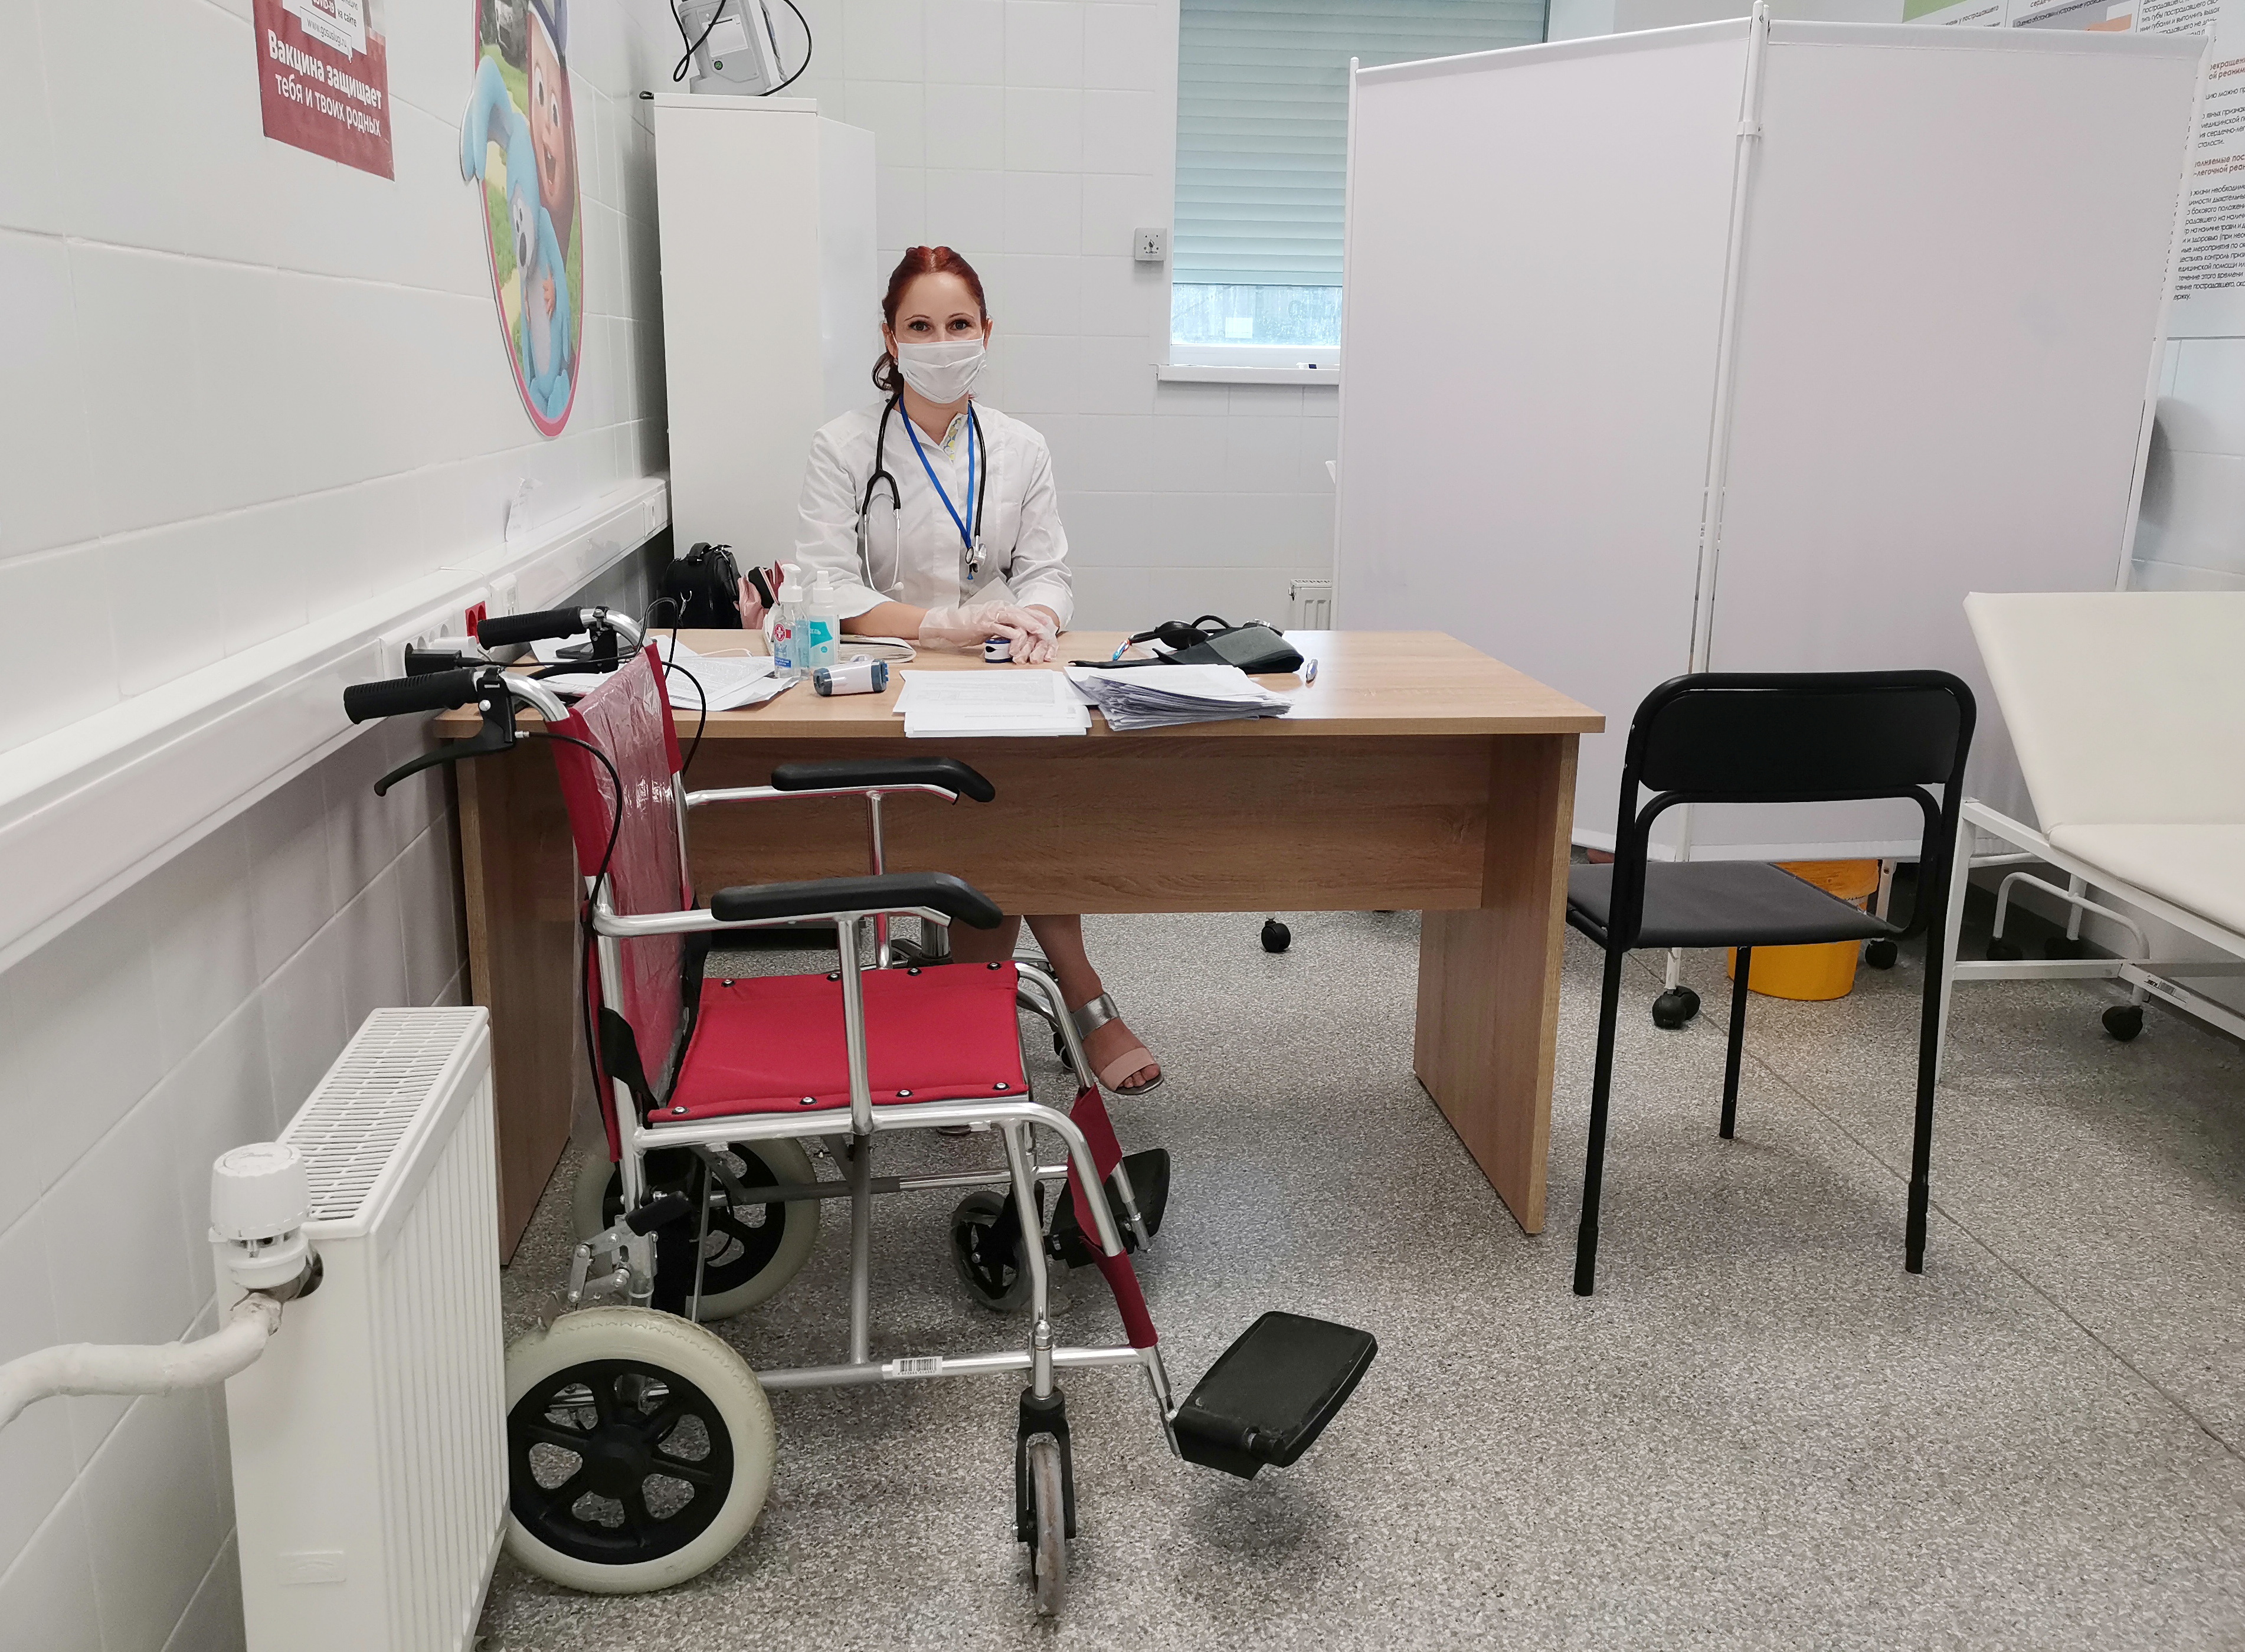 A medical specialist waits for recipients of COVID-19 vaccine in Belgorod